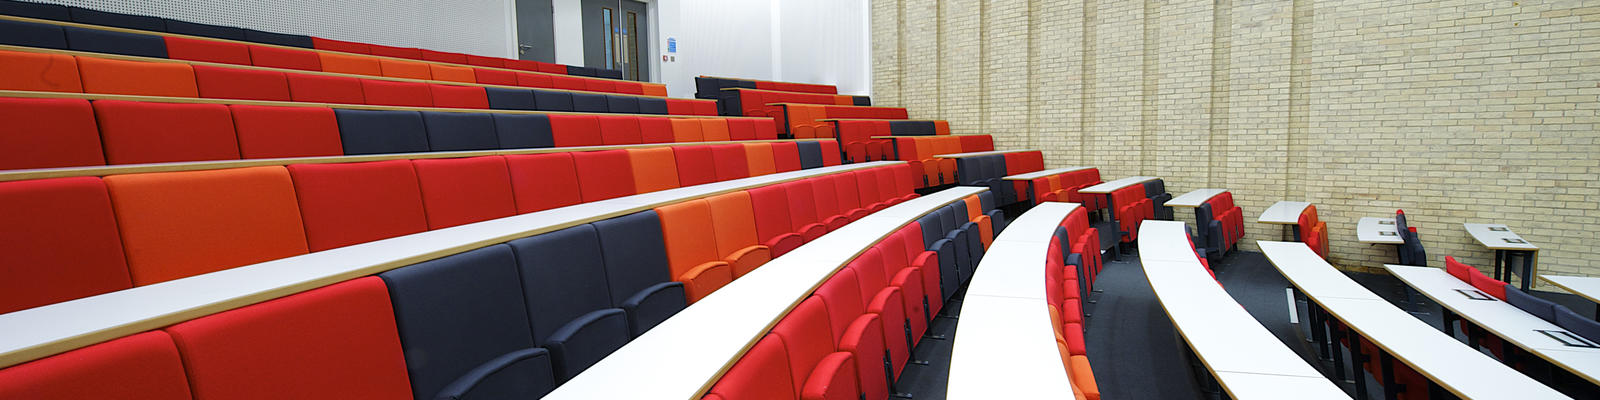 Lecture theater seats on 51福利 campus